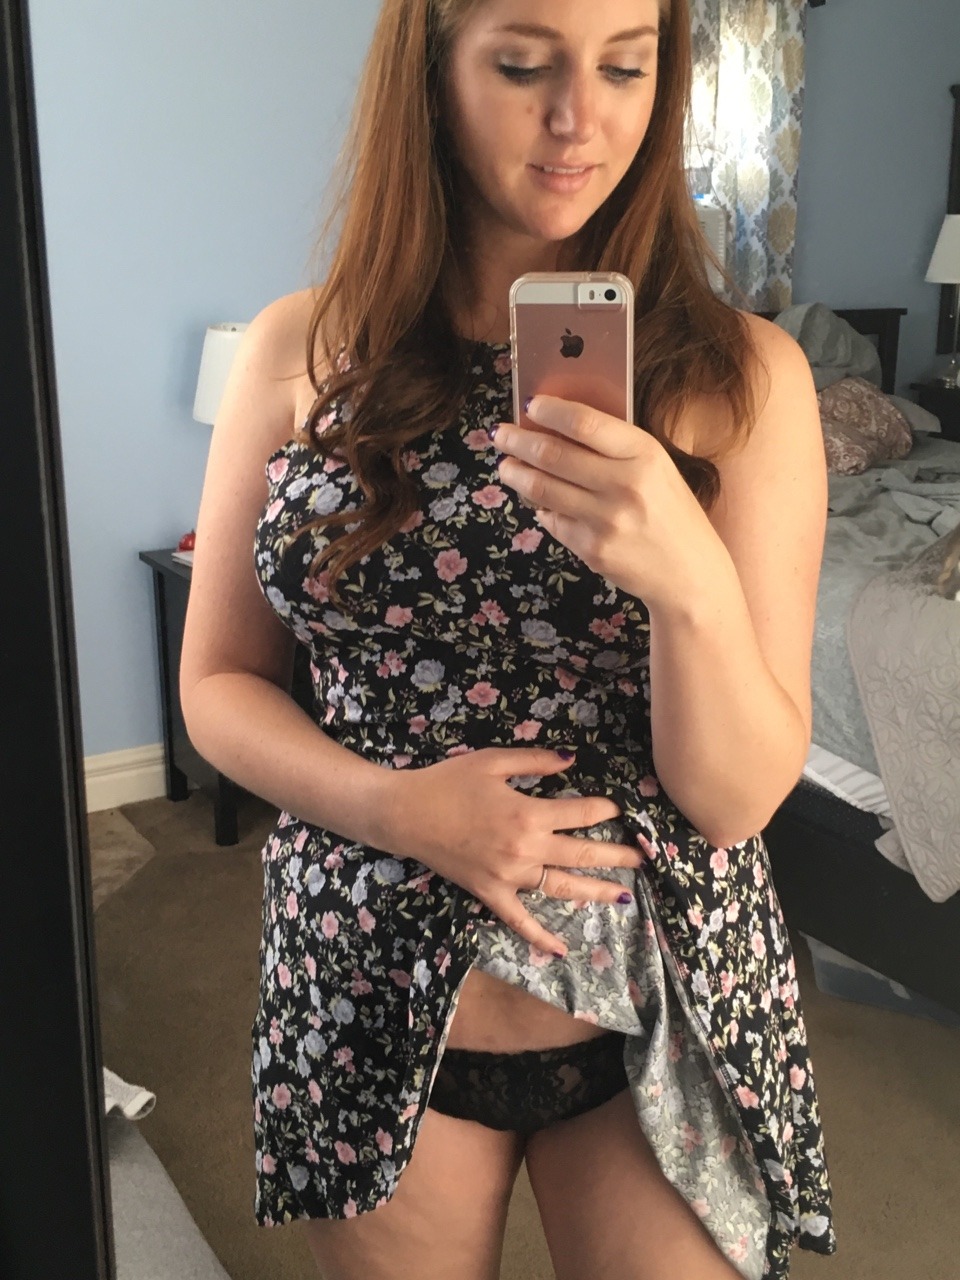 mrs-tasty:  Getting ready to make a video for some lucky guy!! I’m so excited,